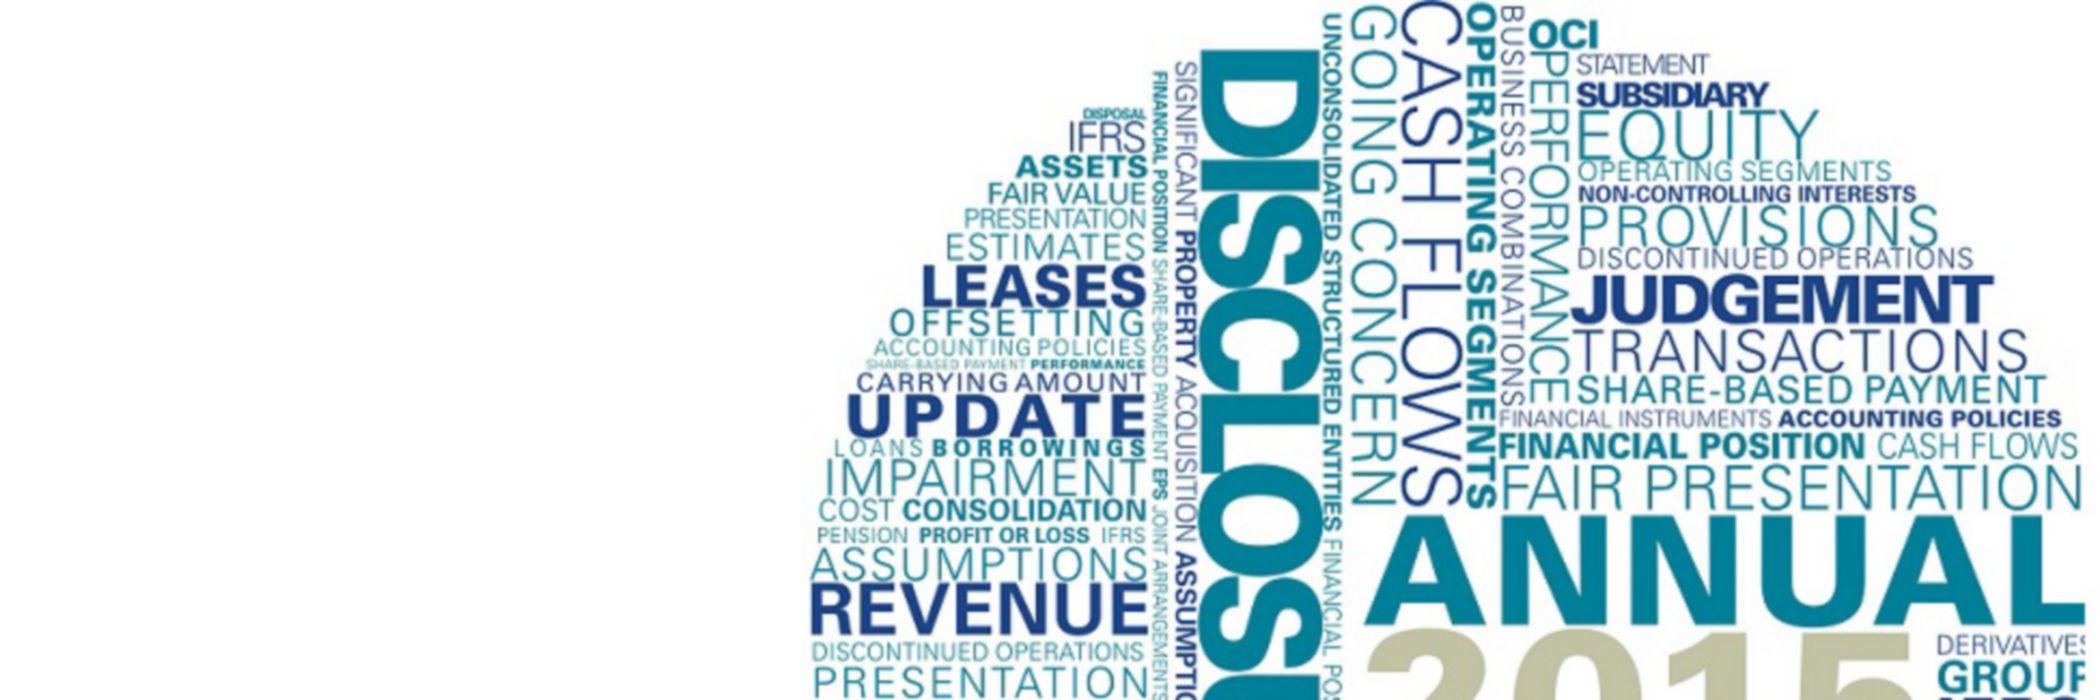 KPMG guides to interim IFRS financial statements 2015 publication image: financial statement and disclosure word cloud